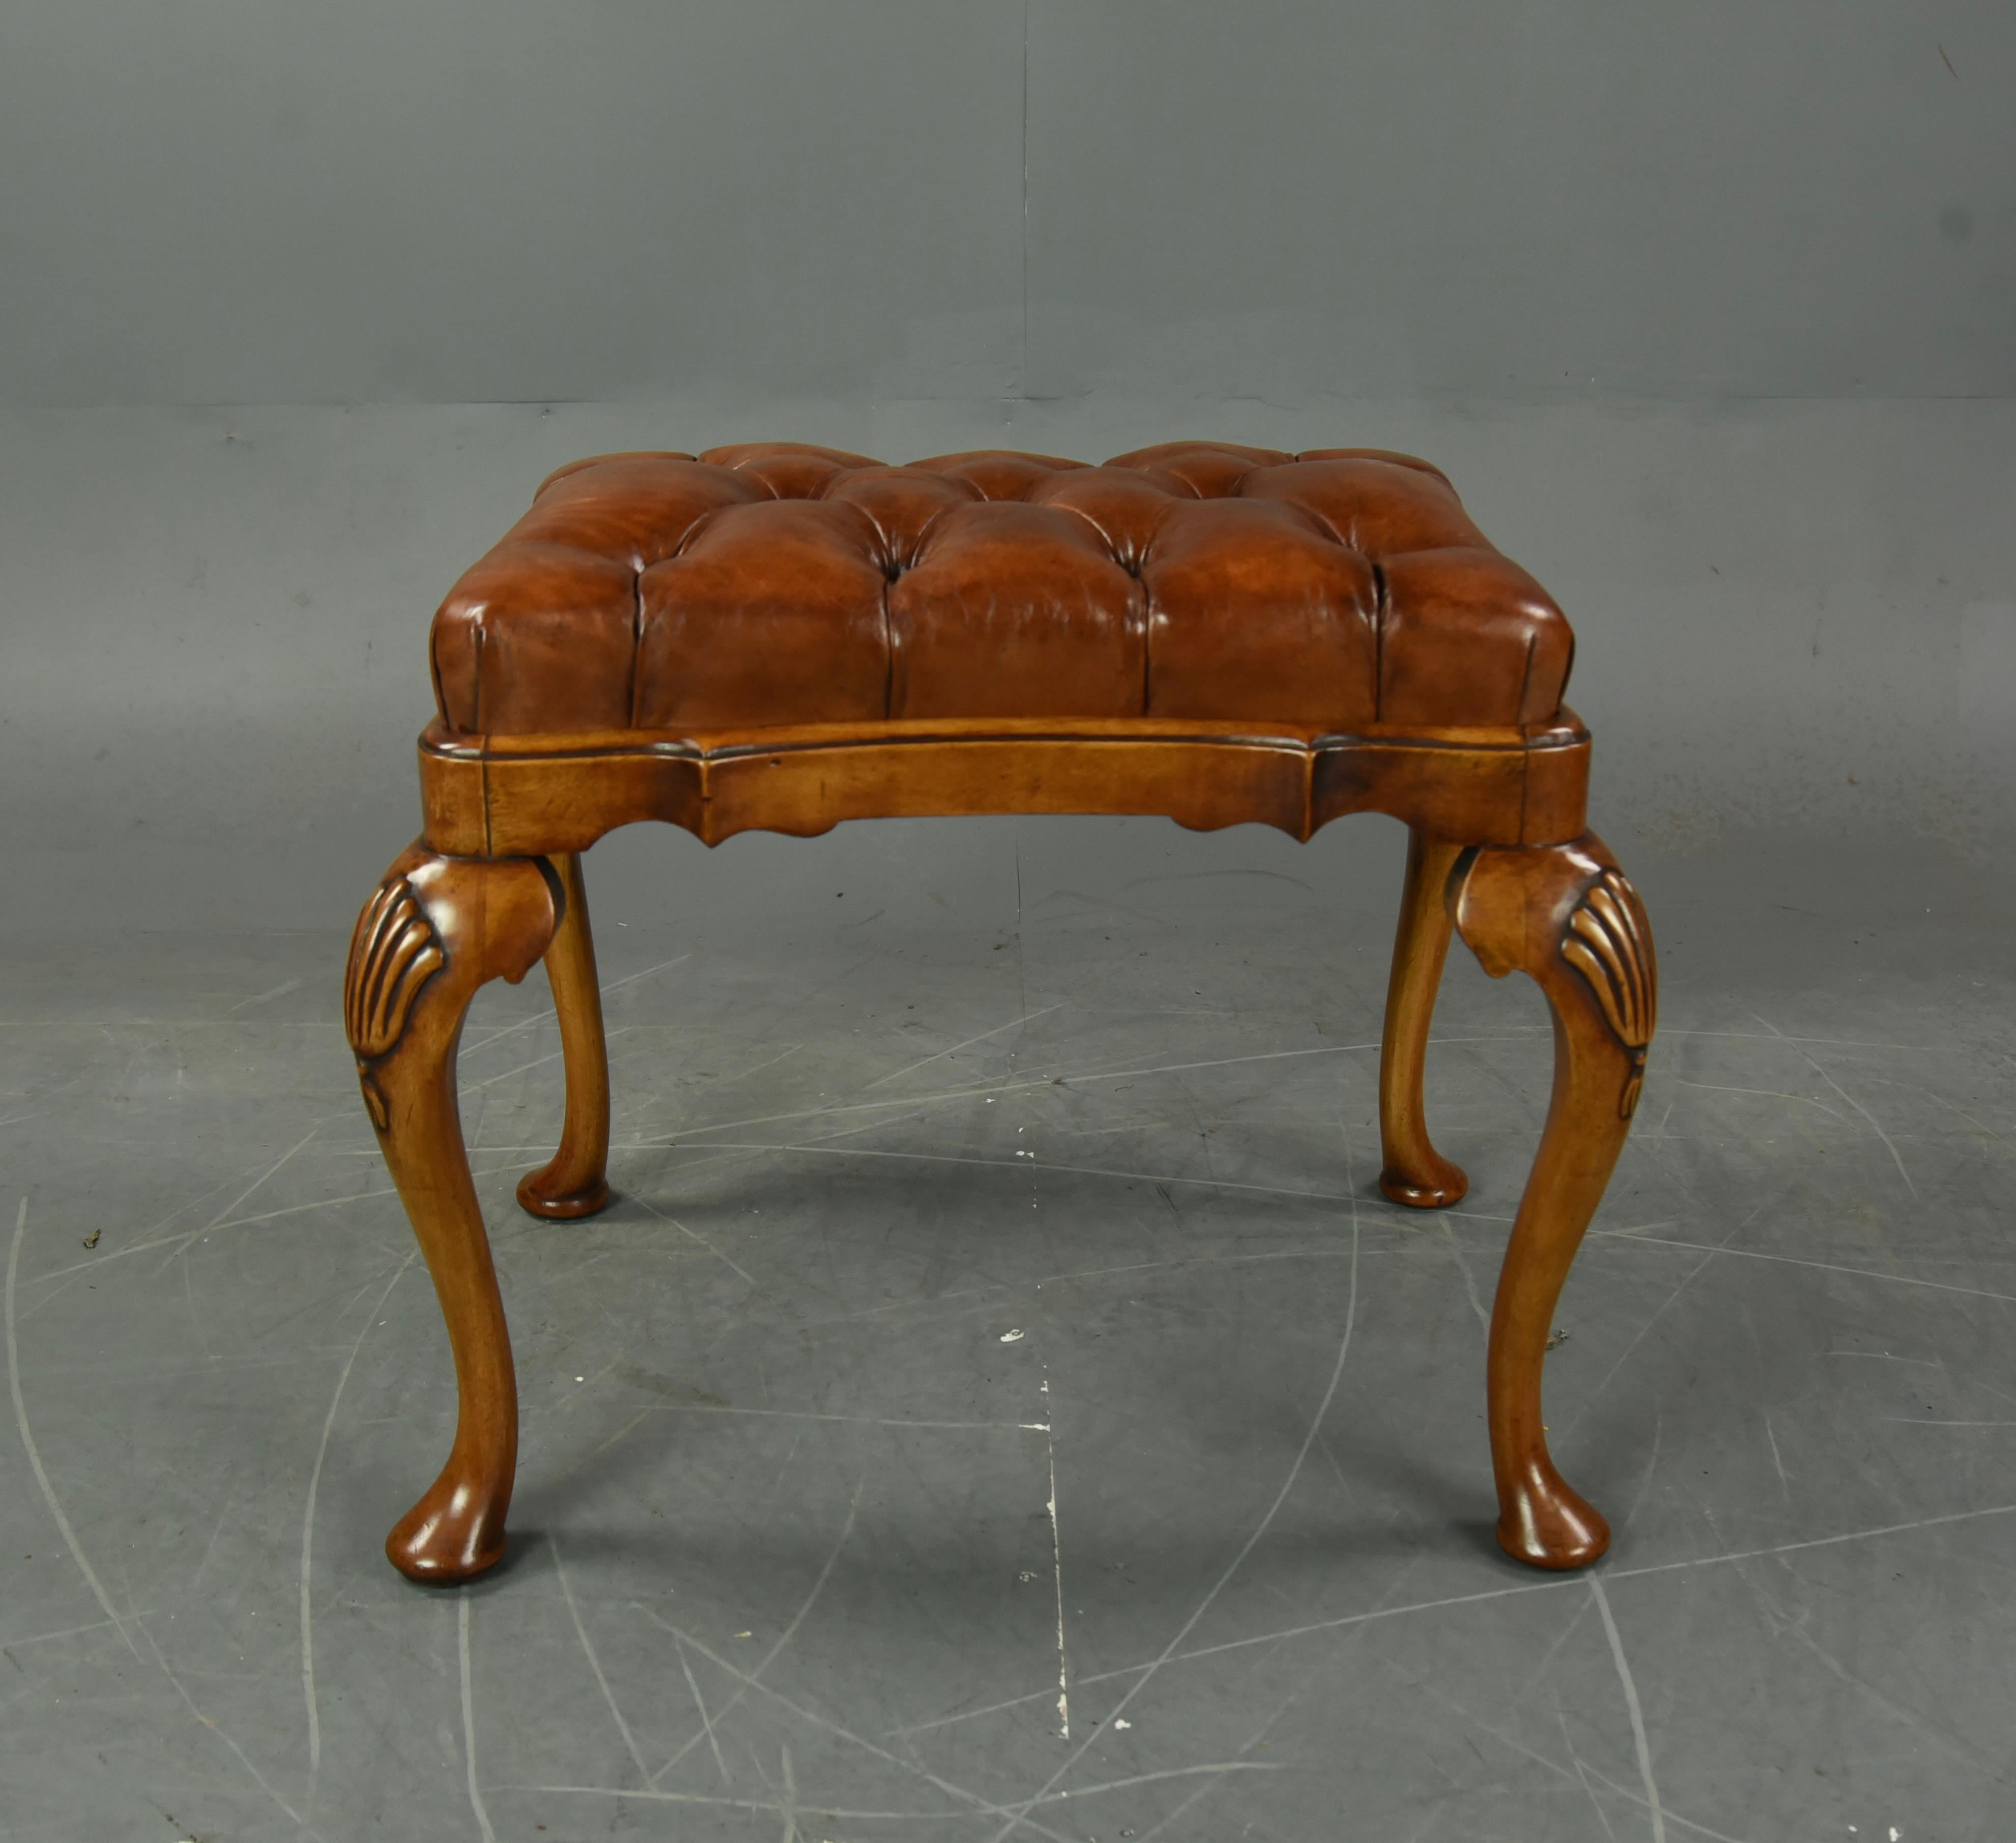 Wonderful Queen Anne style walnut stool.
The stool has very elegant Queen Anne style legs with carved shell knees.
The Stool has a luxurious deep buttoned hand dyed leather drop seat.
The stool is very sturdy with no loose joints and in great